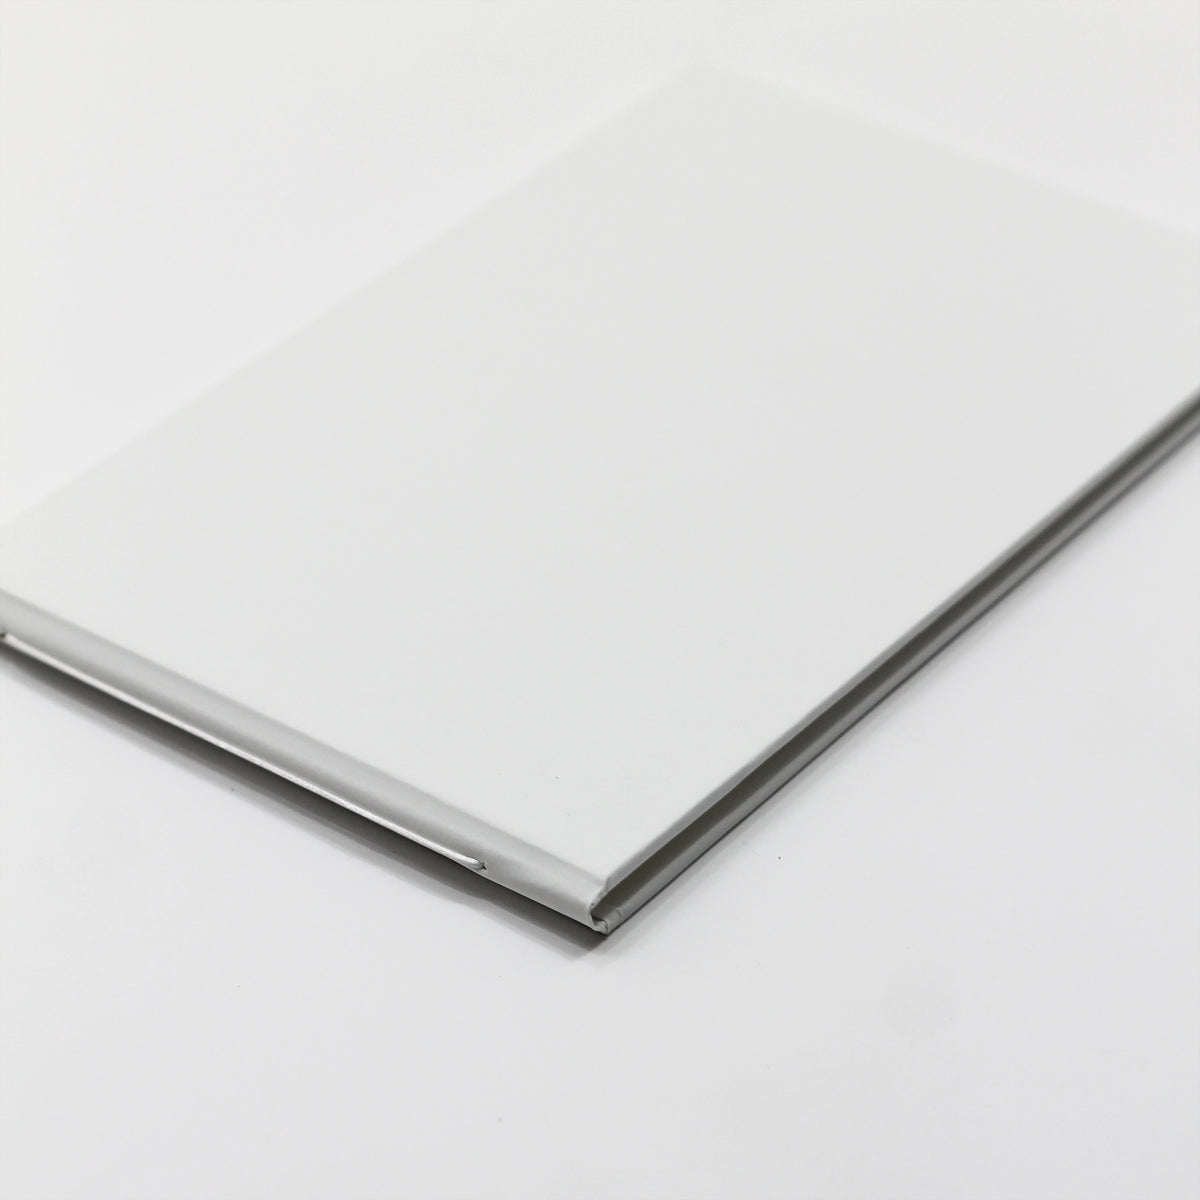 Guestbook with White Vegan Leather Cover